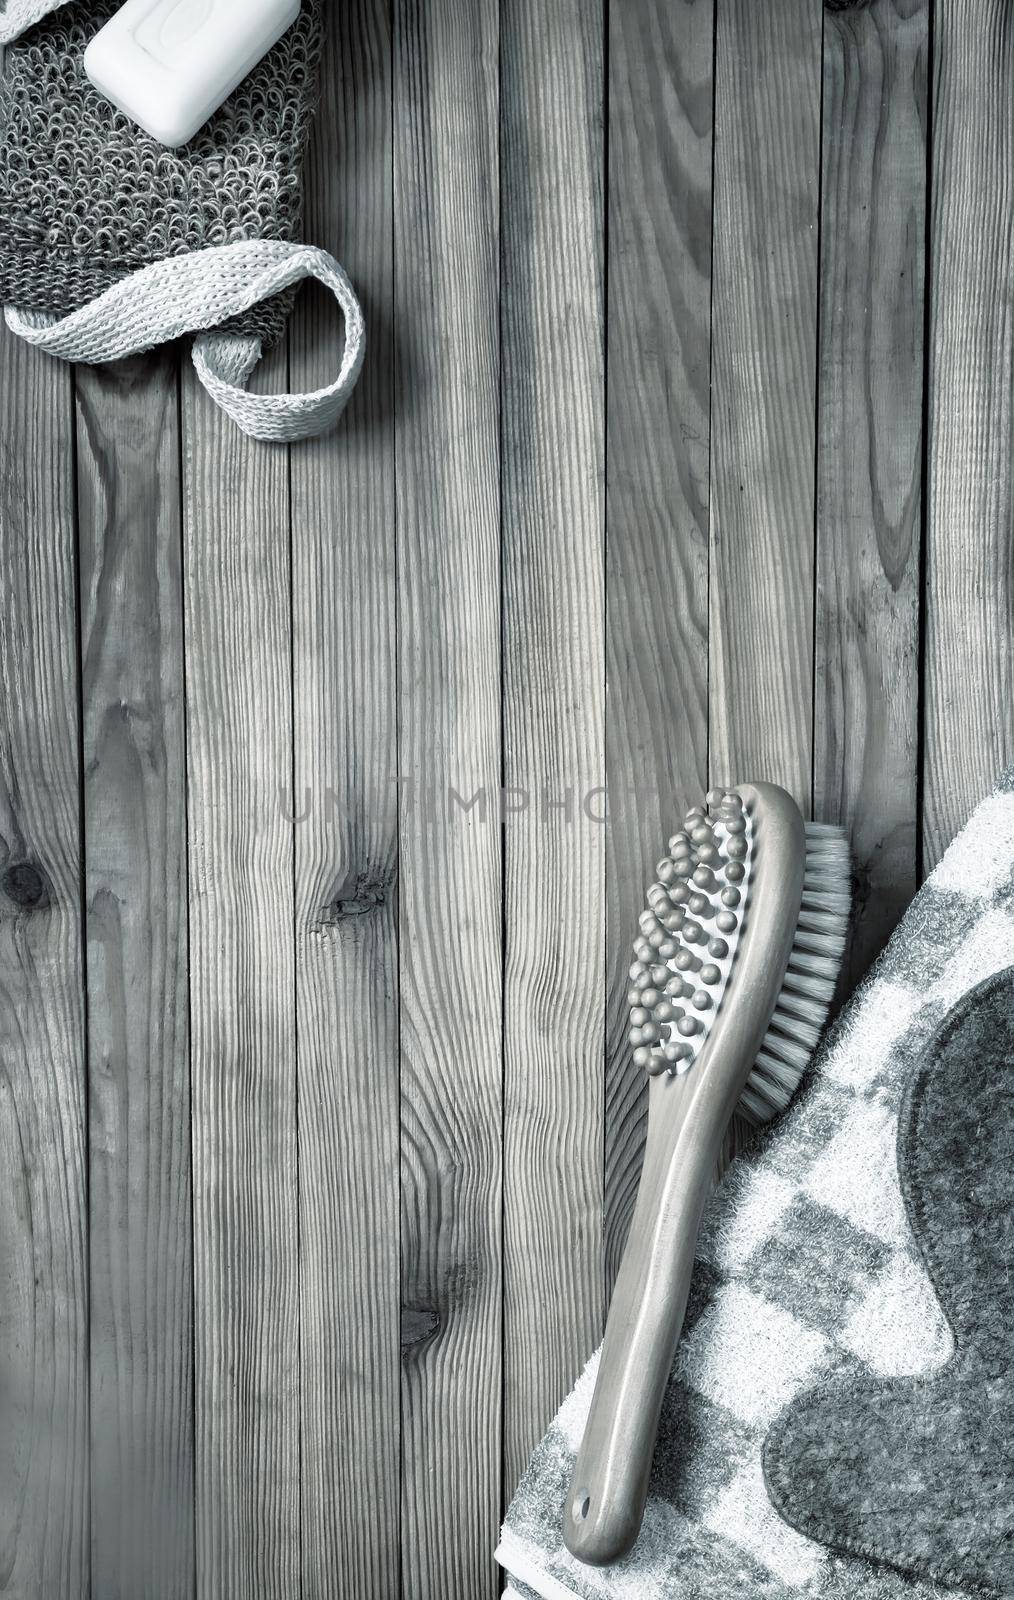 Accessories for visiting a bath or sauna on a wooden background: towel, washcloth, massage brush, soap, glove. Top view with copy space. Flat lay